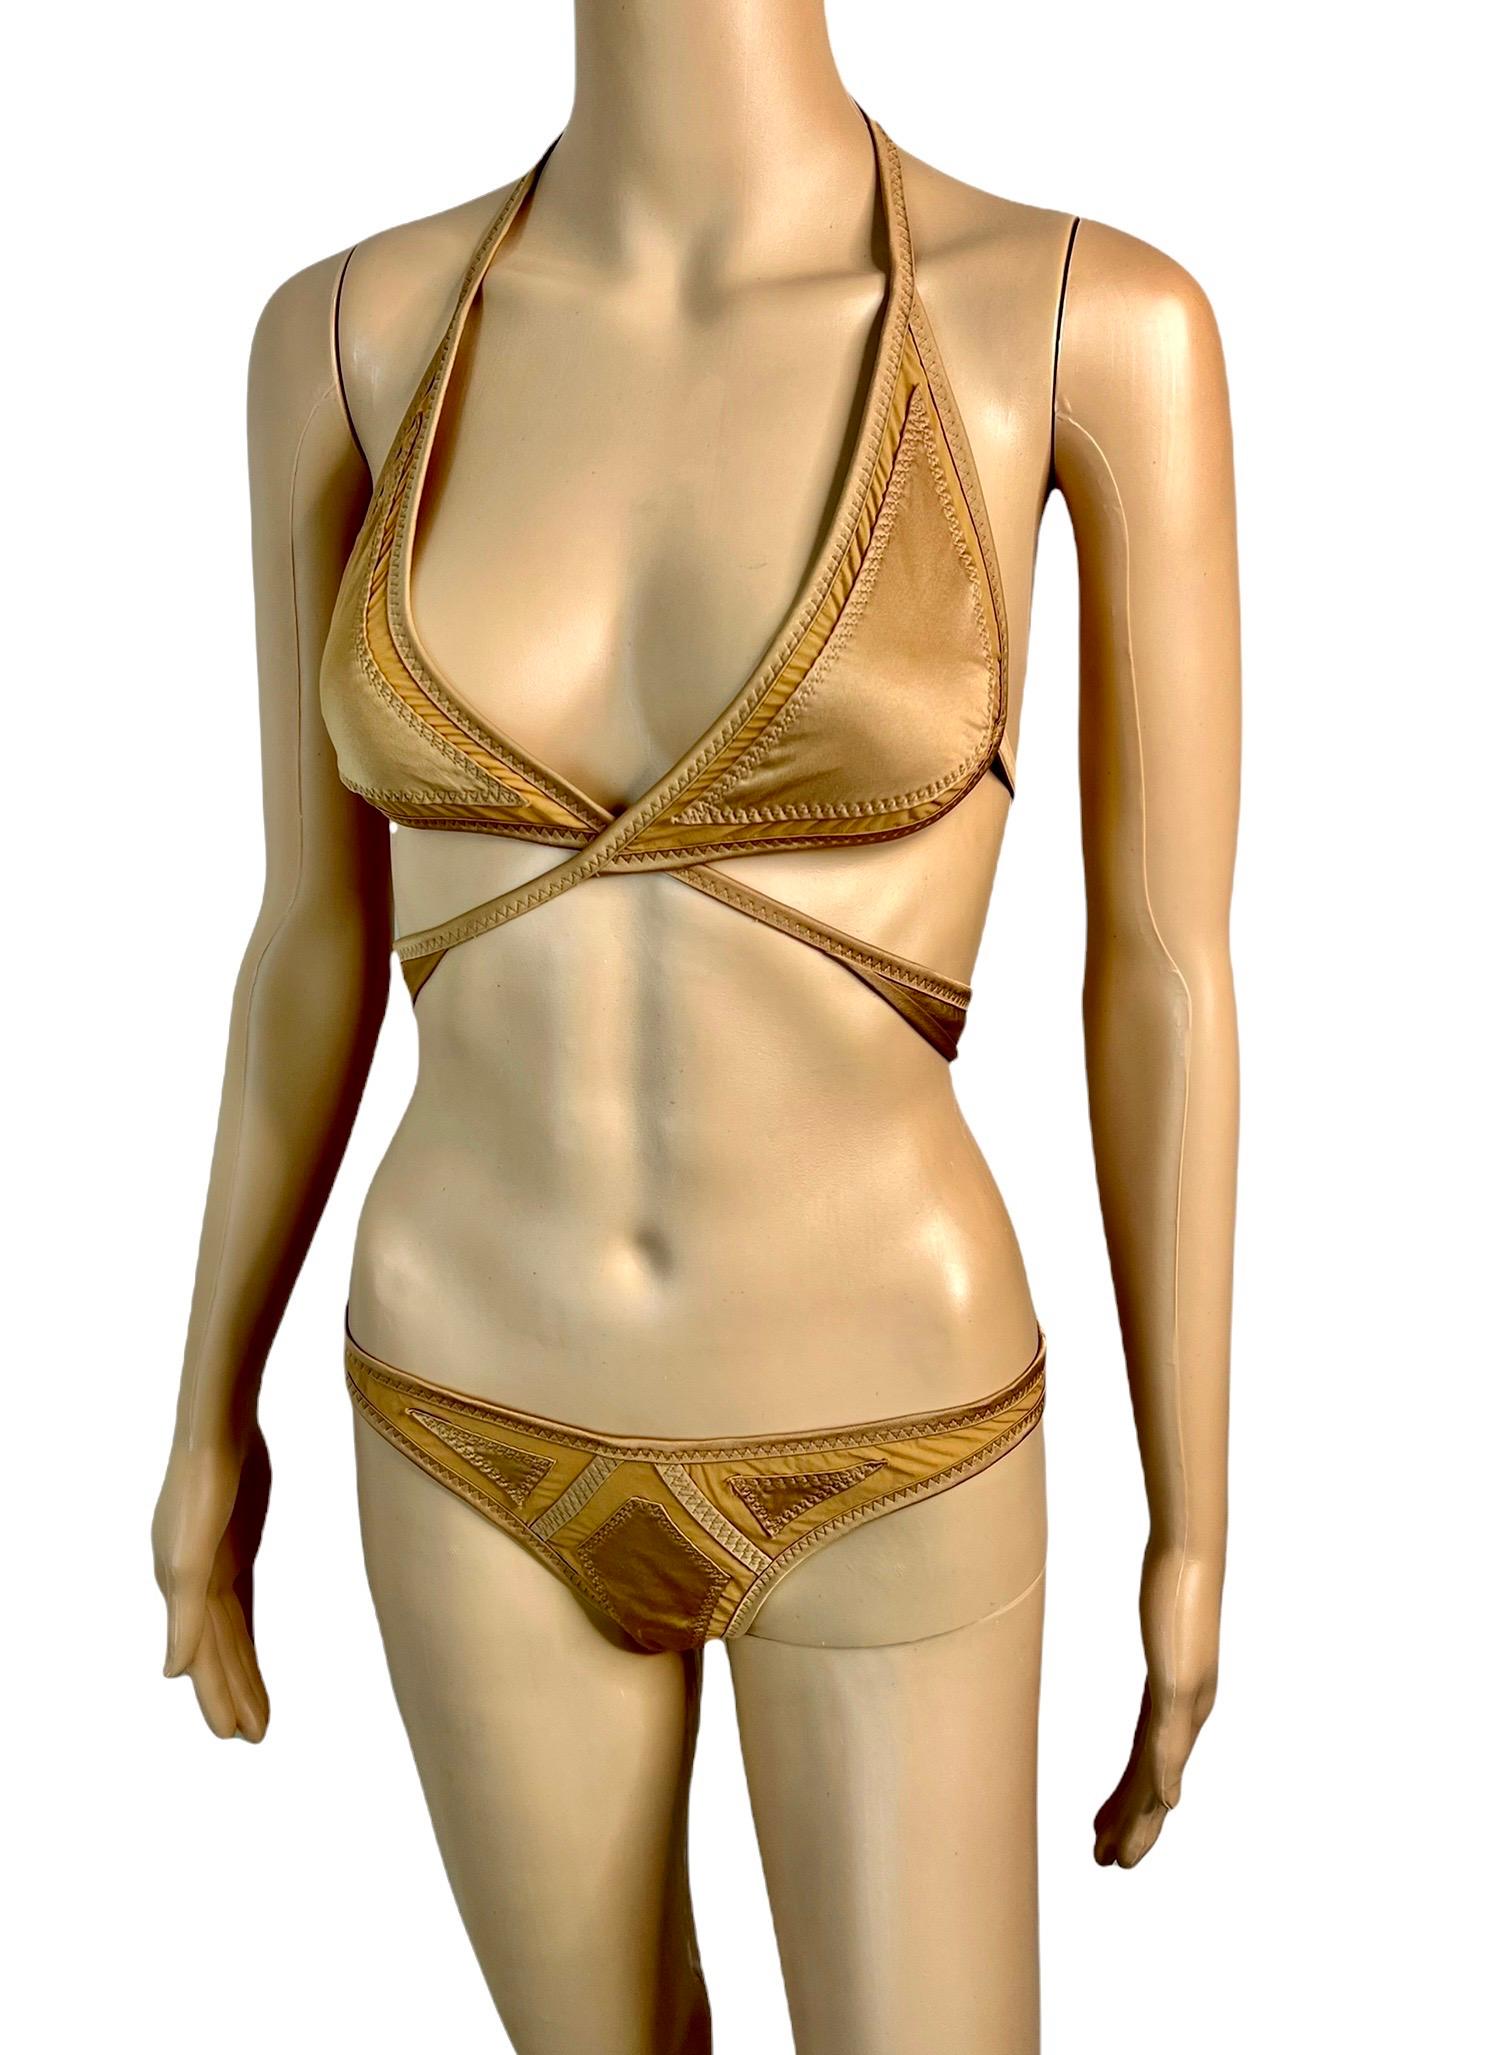 Louis Vuitton Bathing Suit One Piece - For Sale on 1stDibs